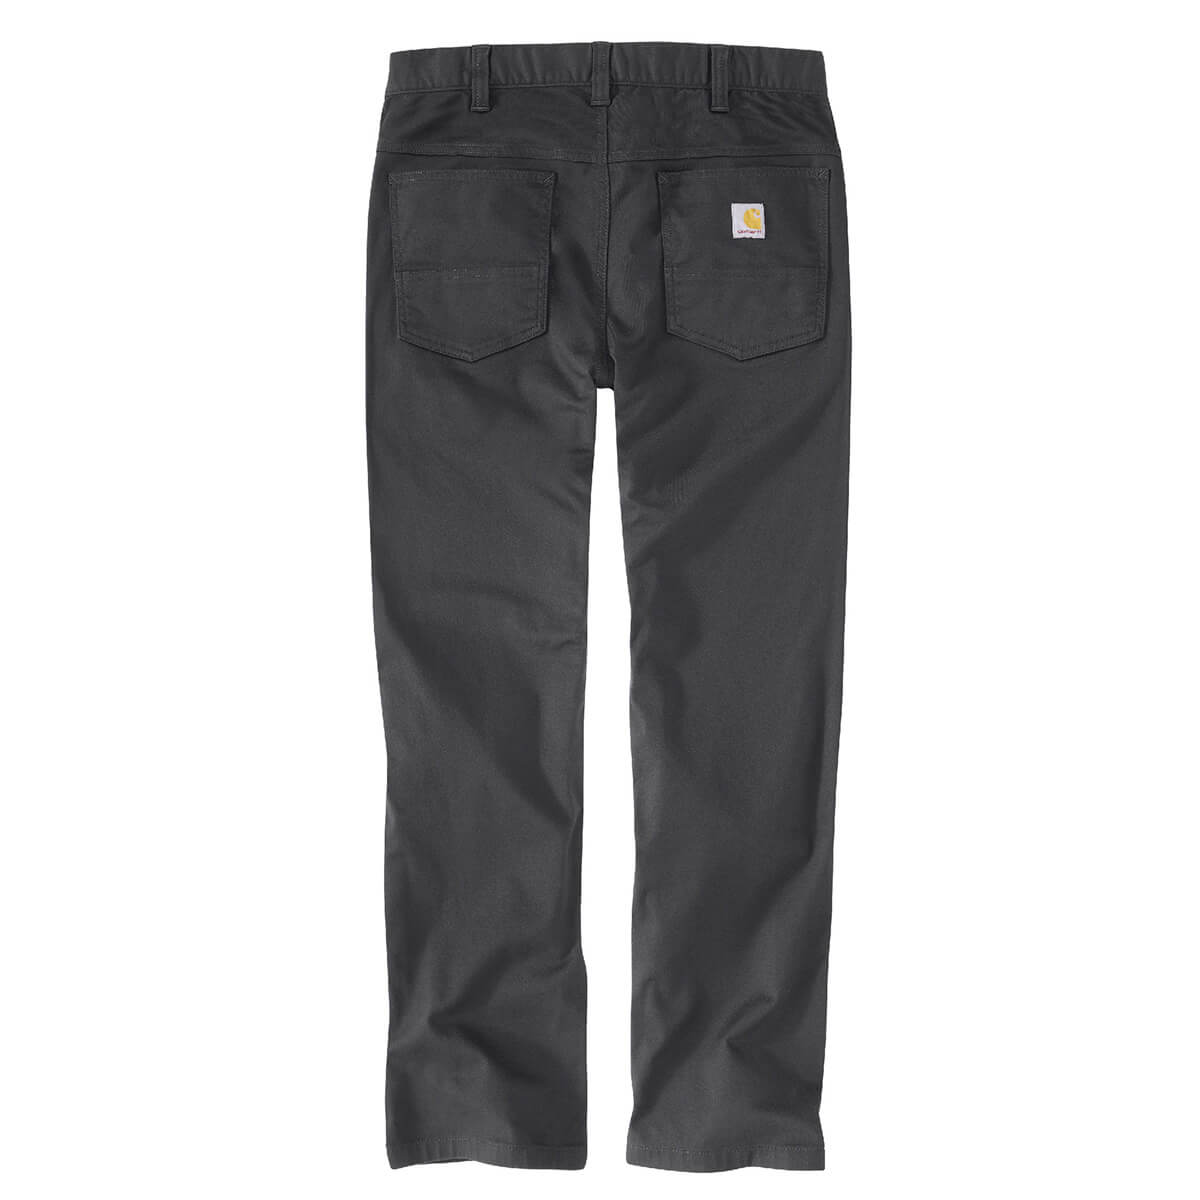 106279 - Carhartt Men's Force® Relaxed Fit Pant